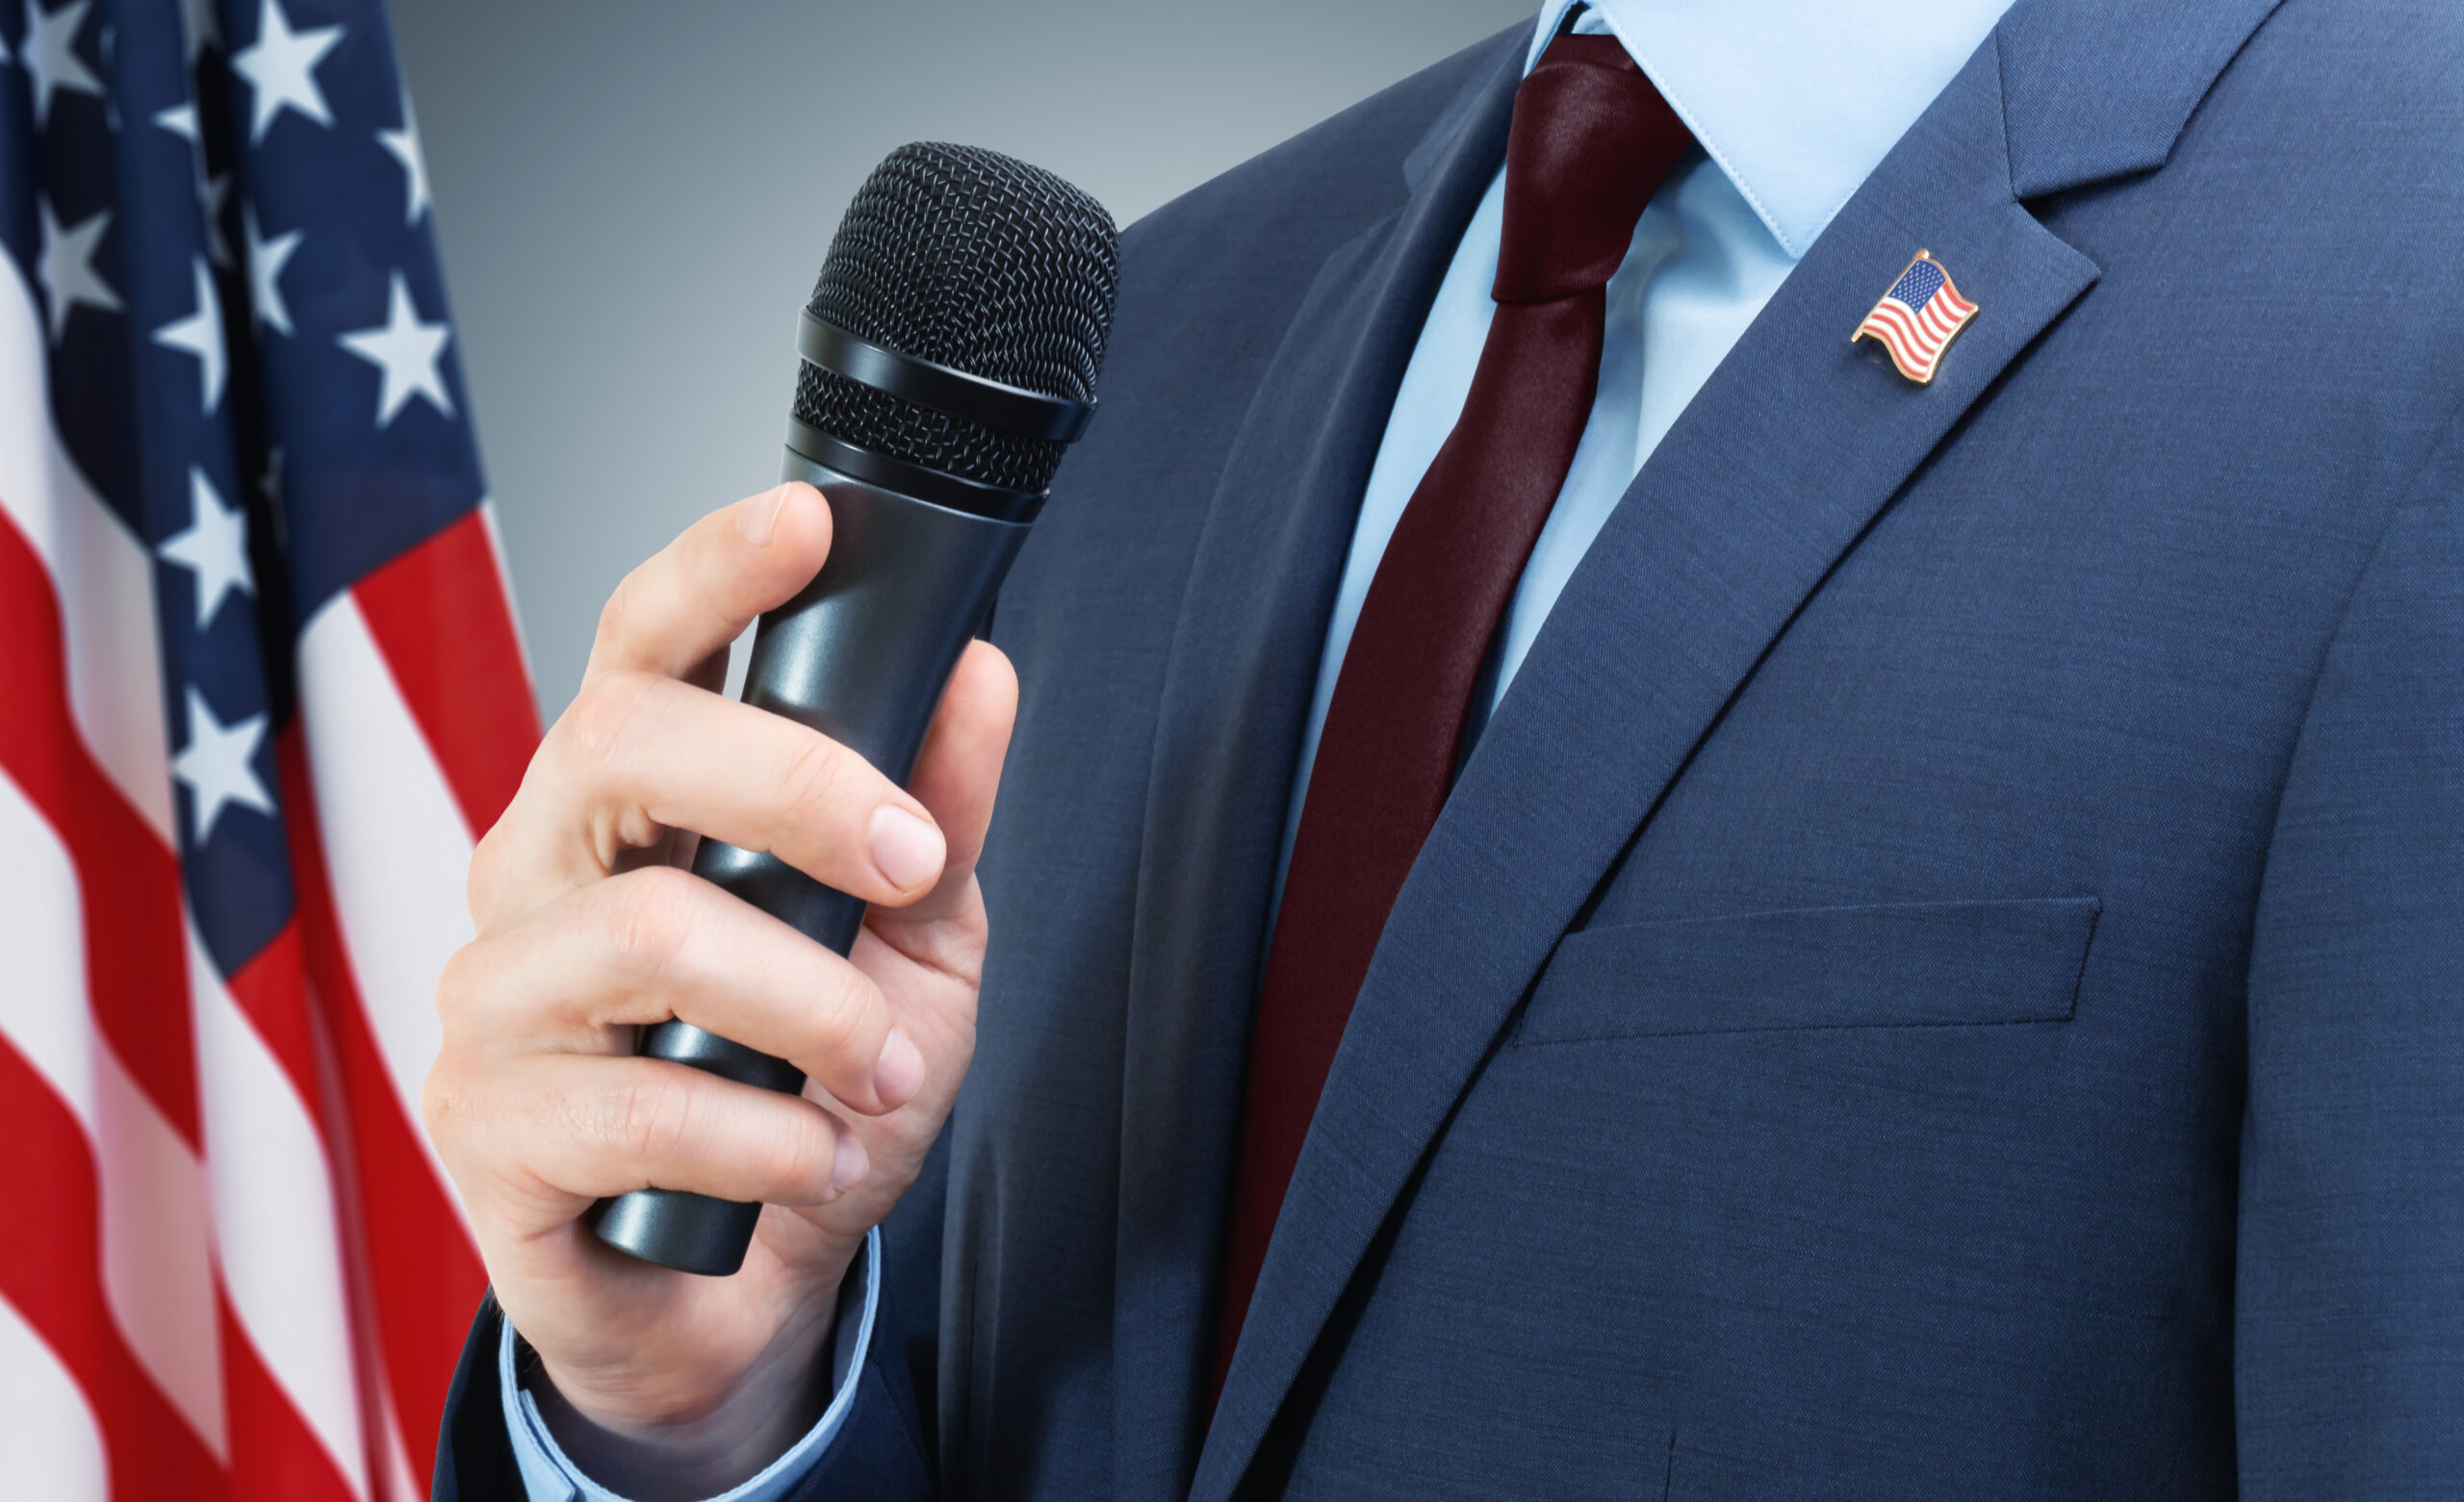 Man in suit holding microphone in hand with USA flag on backgrou